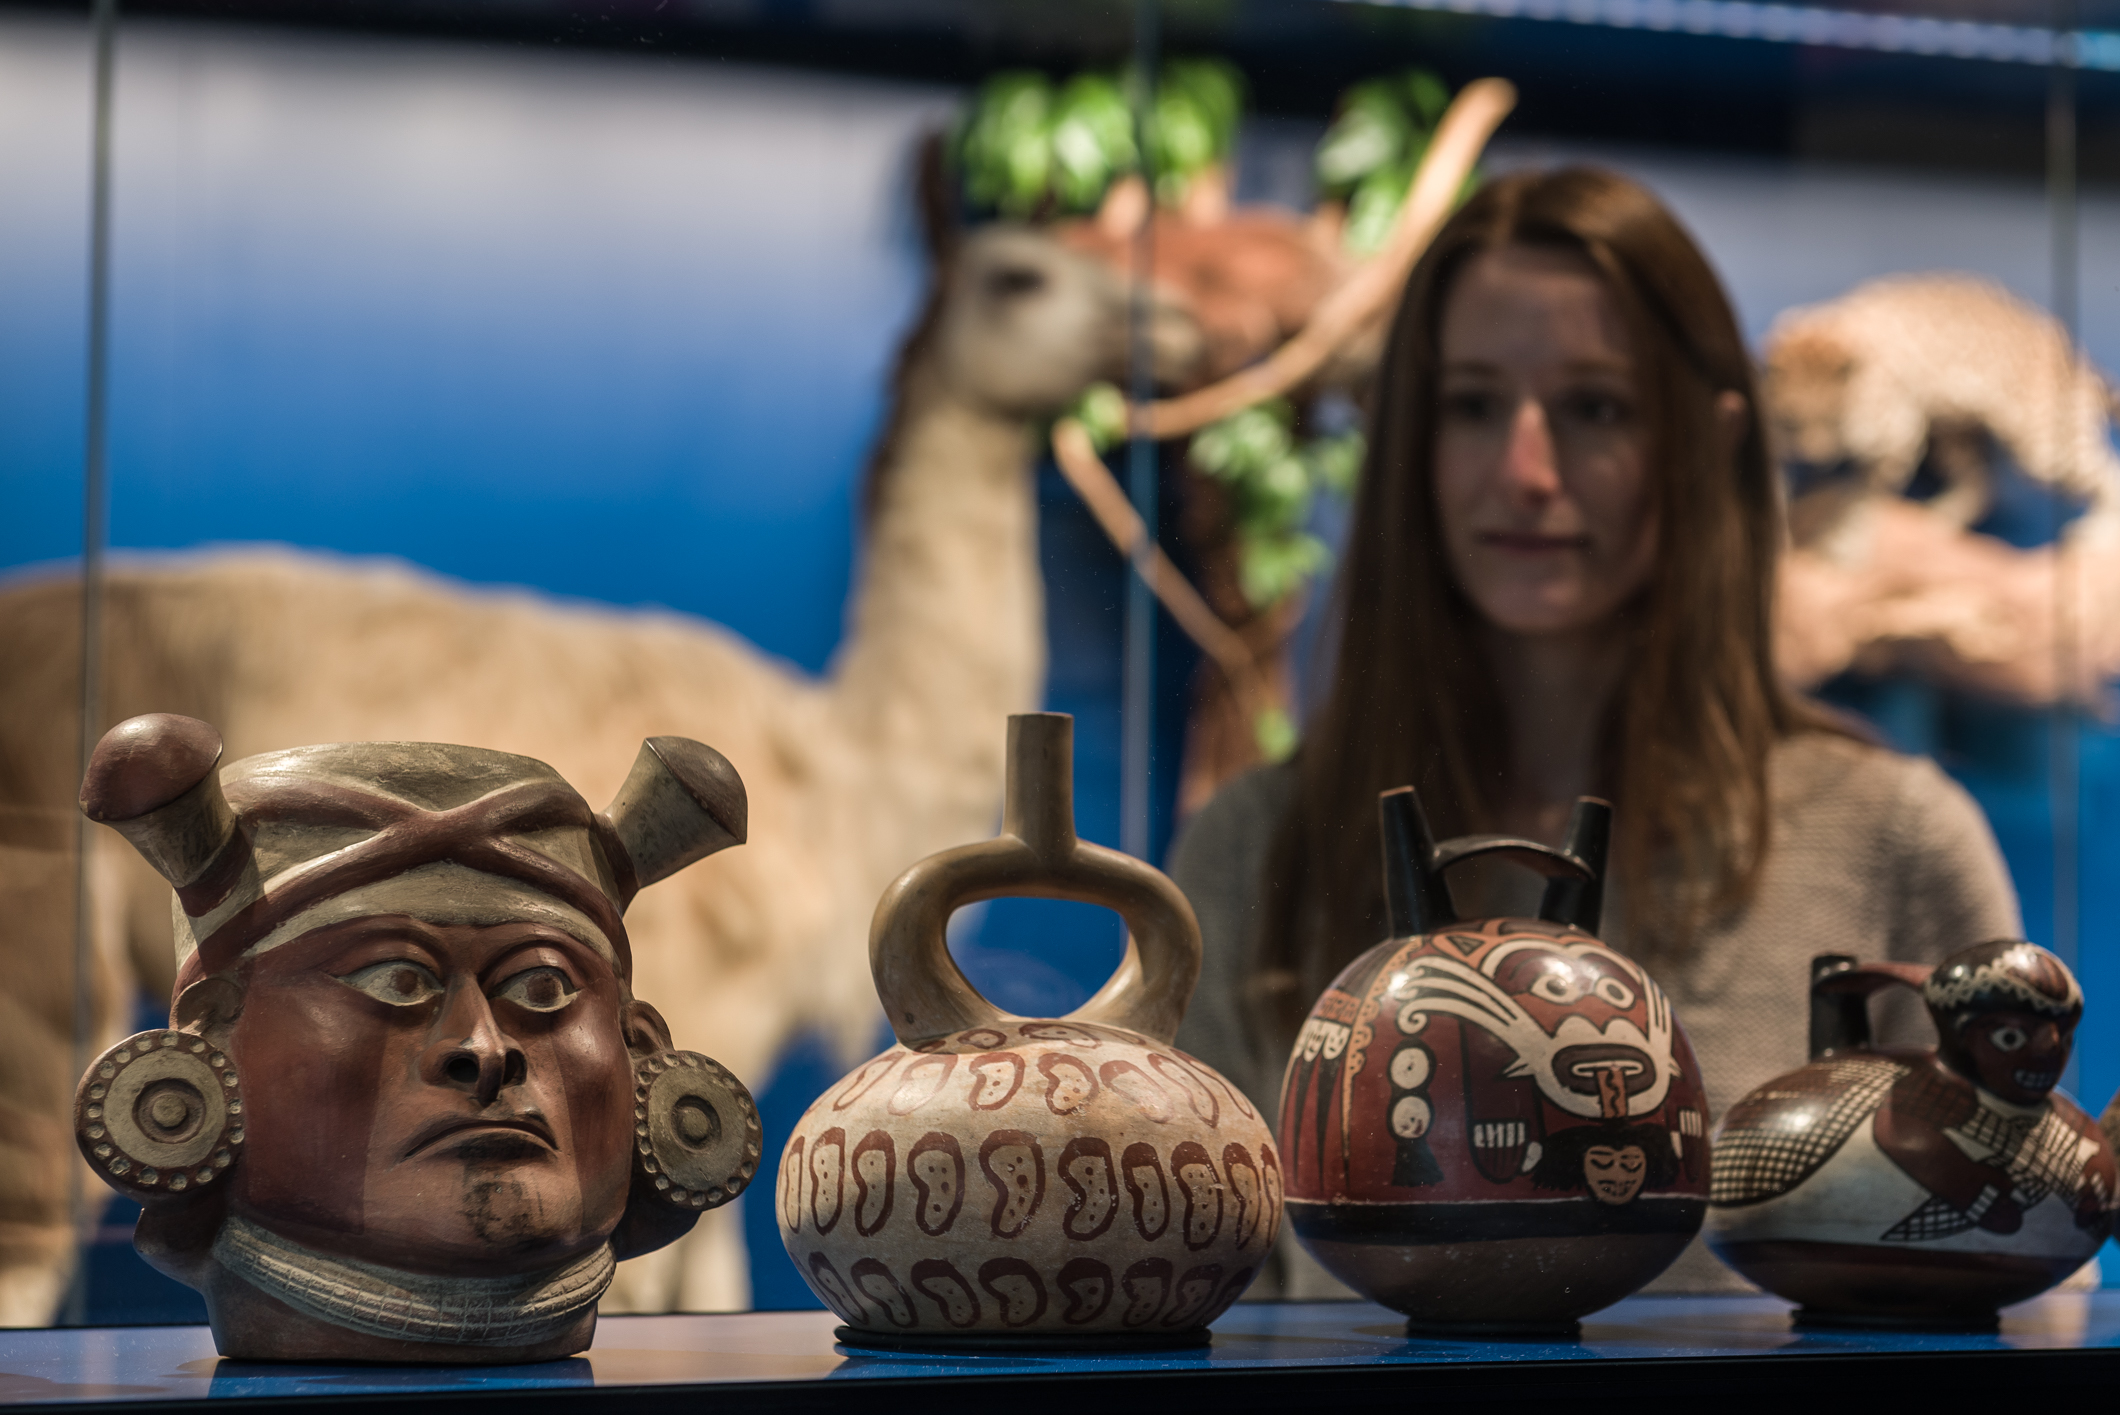 A person looks at exhibits in the Überseemuseum.